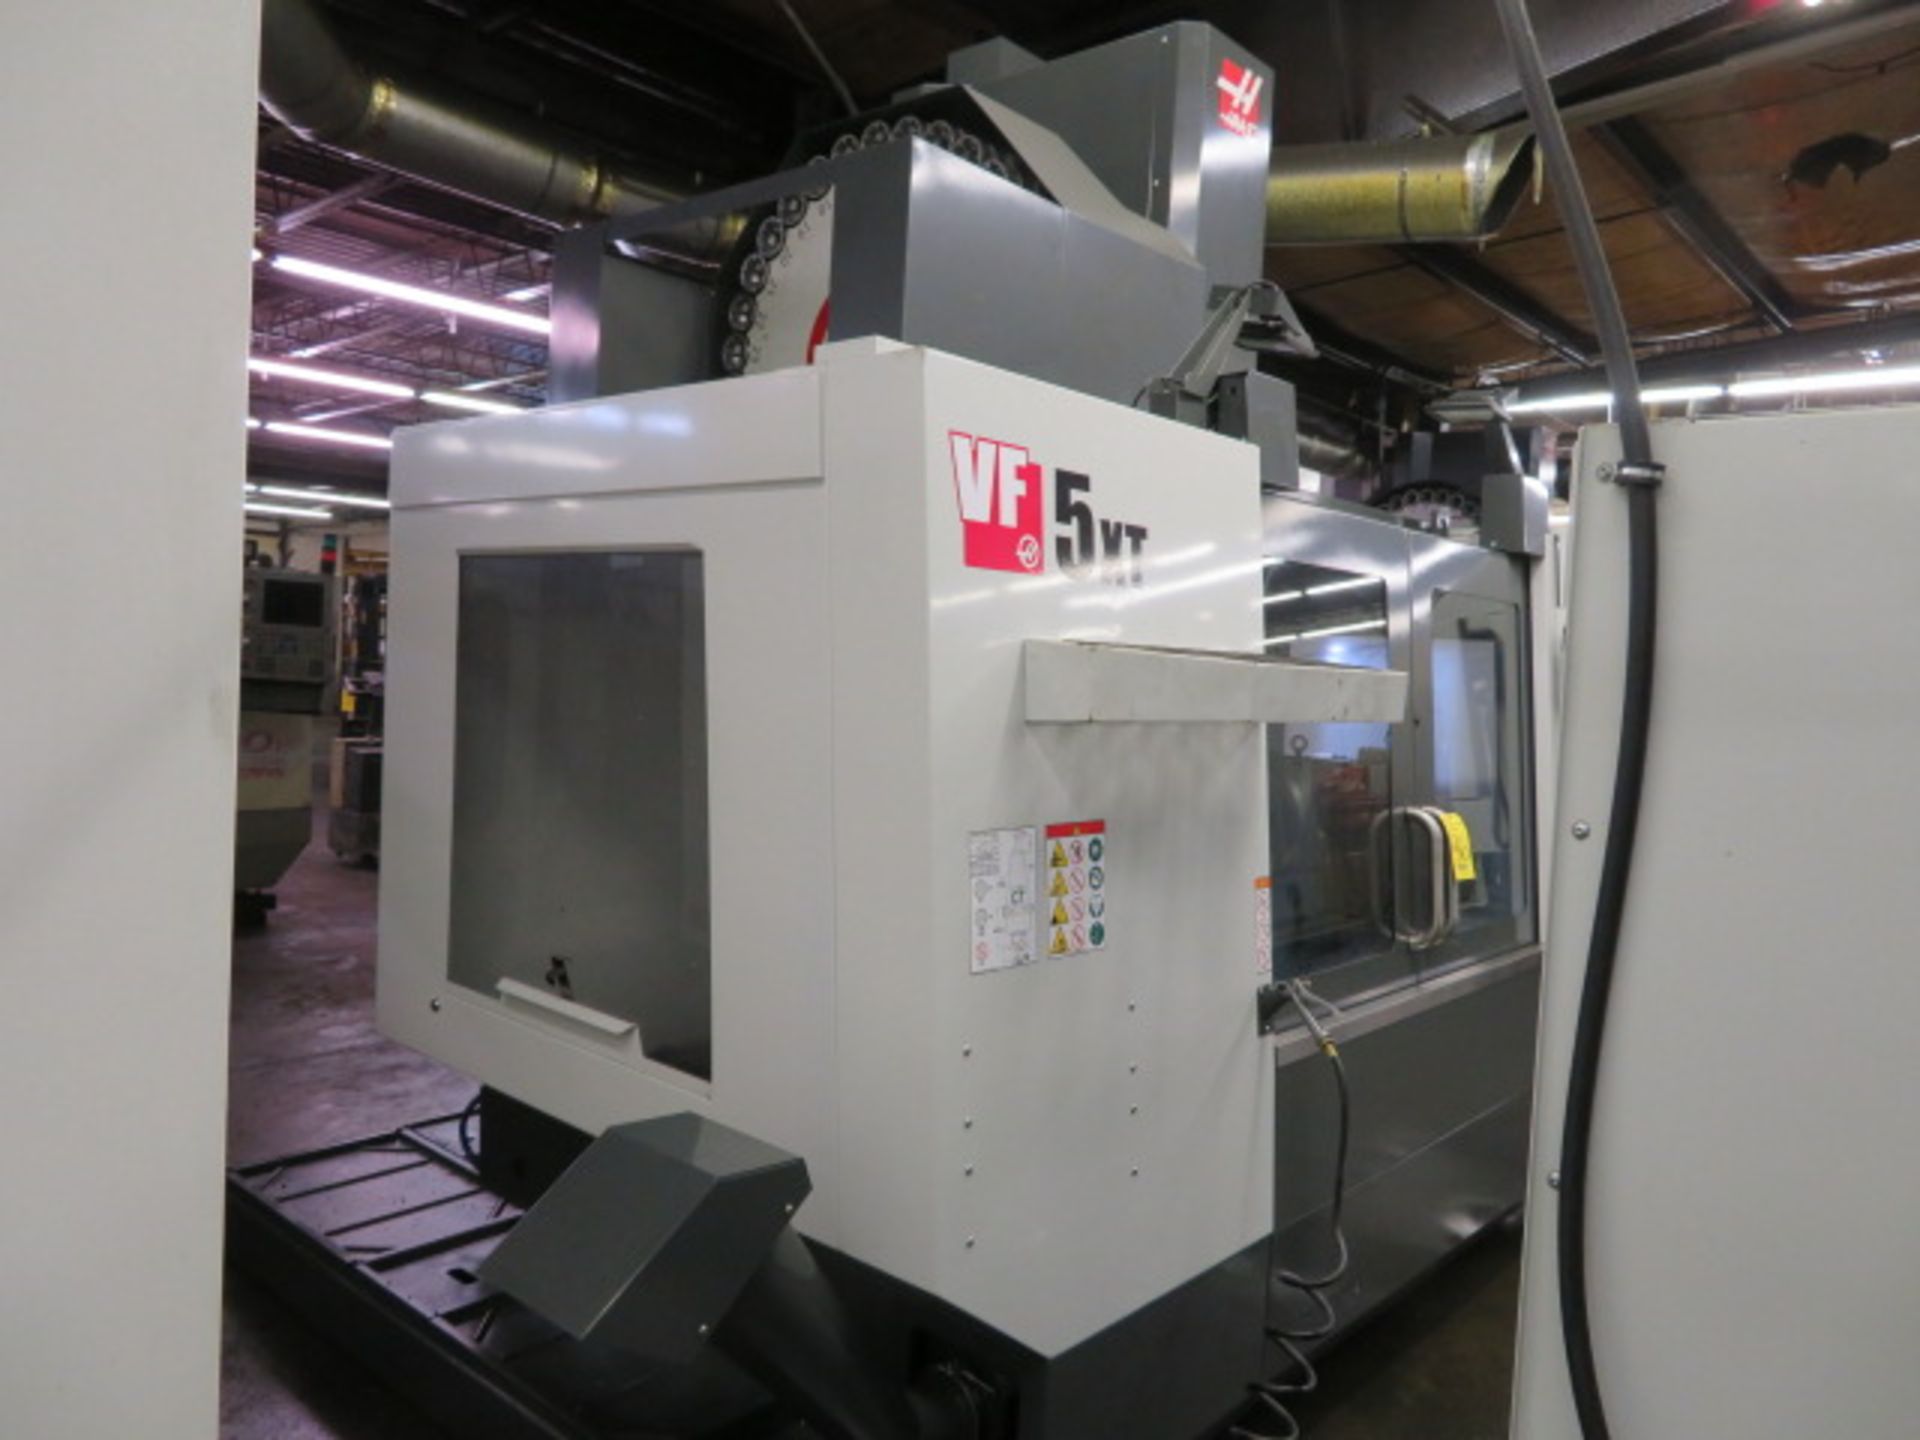 2018 HAAS VF5-50XT CNC Vertical Machining Center, S/N 1151875, HAAS Control, 4TH AXIS ENABLED - Image 6 of 11